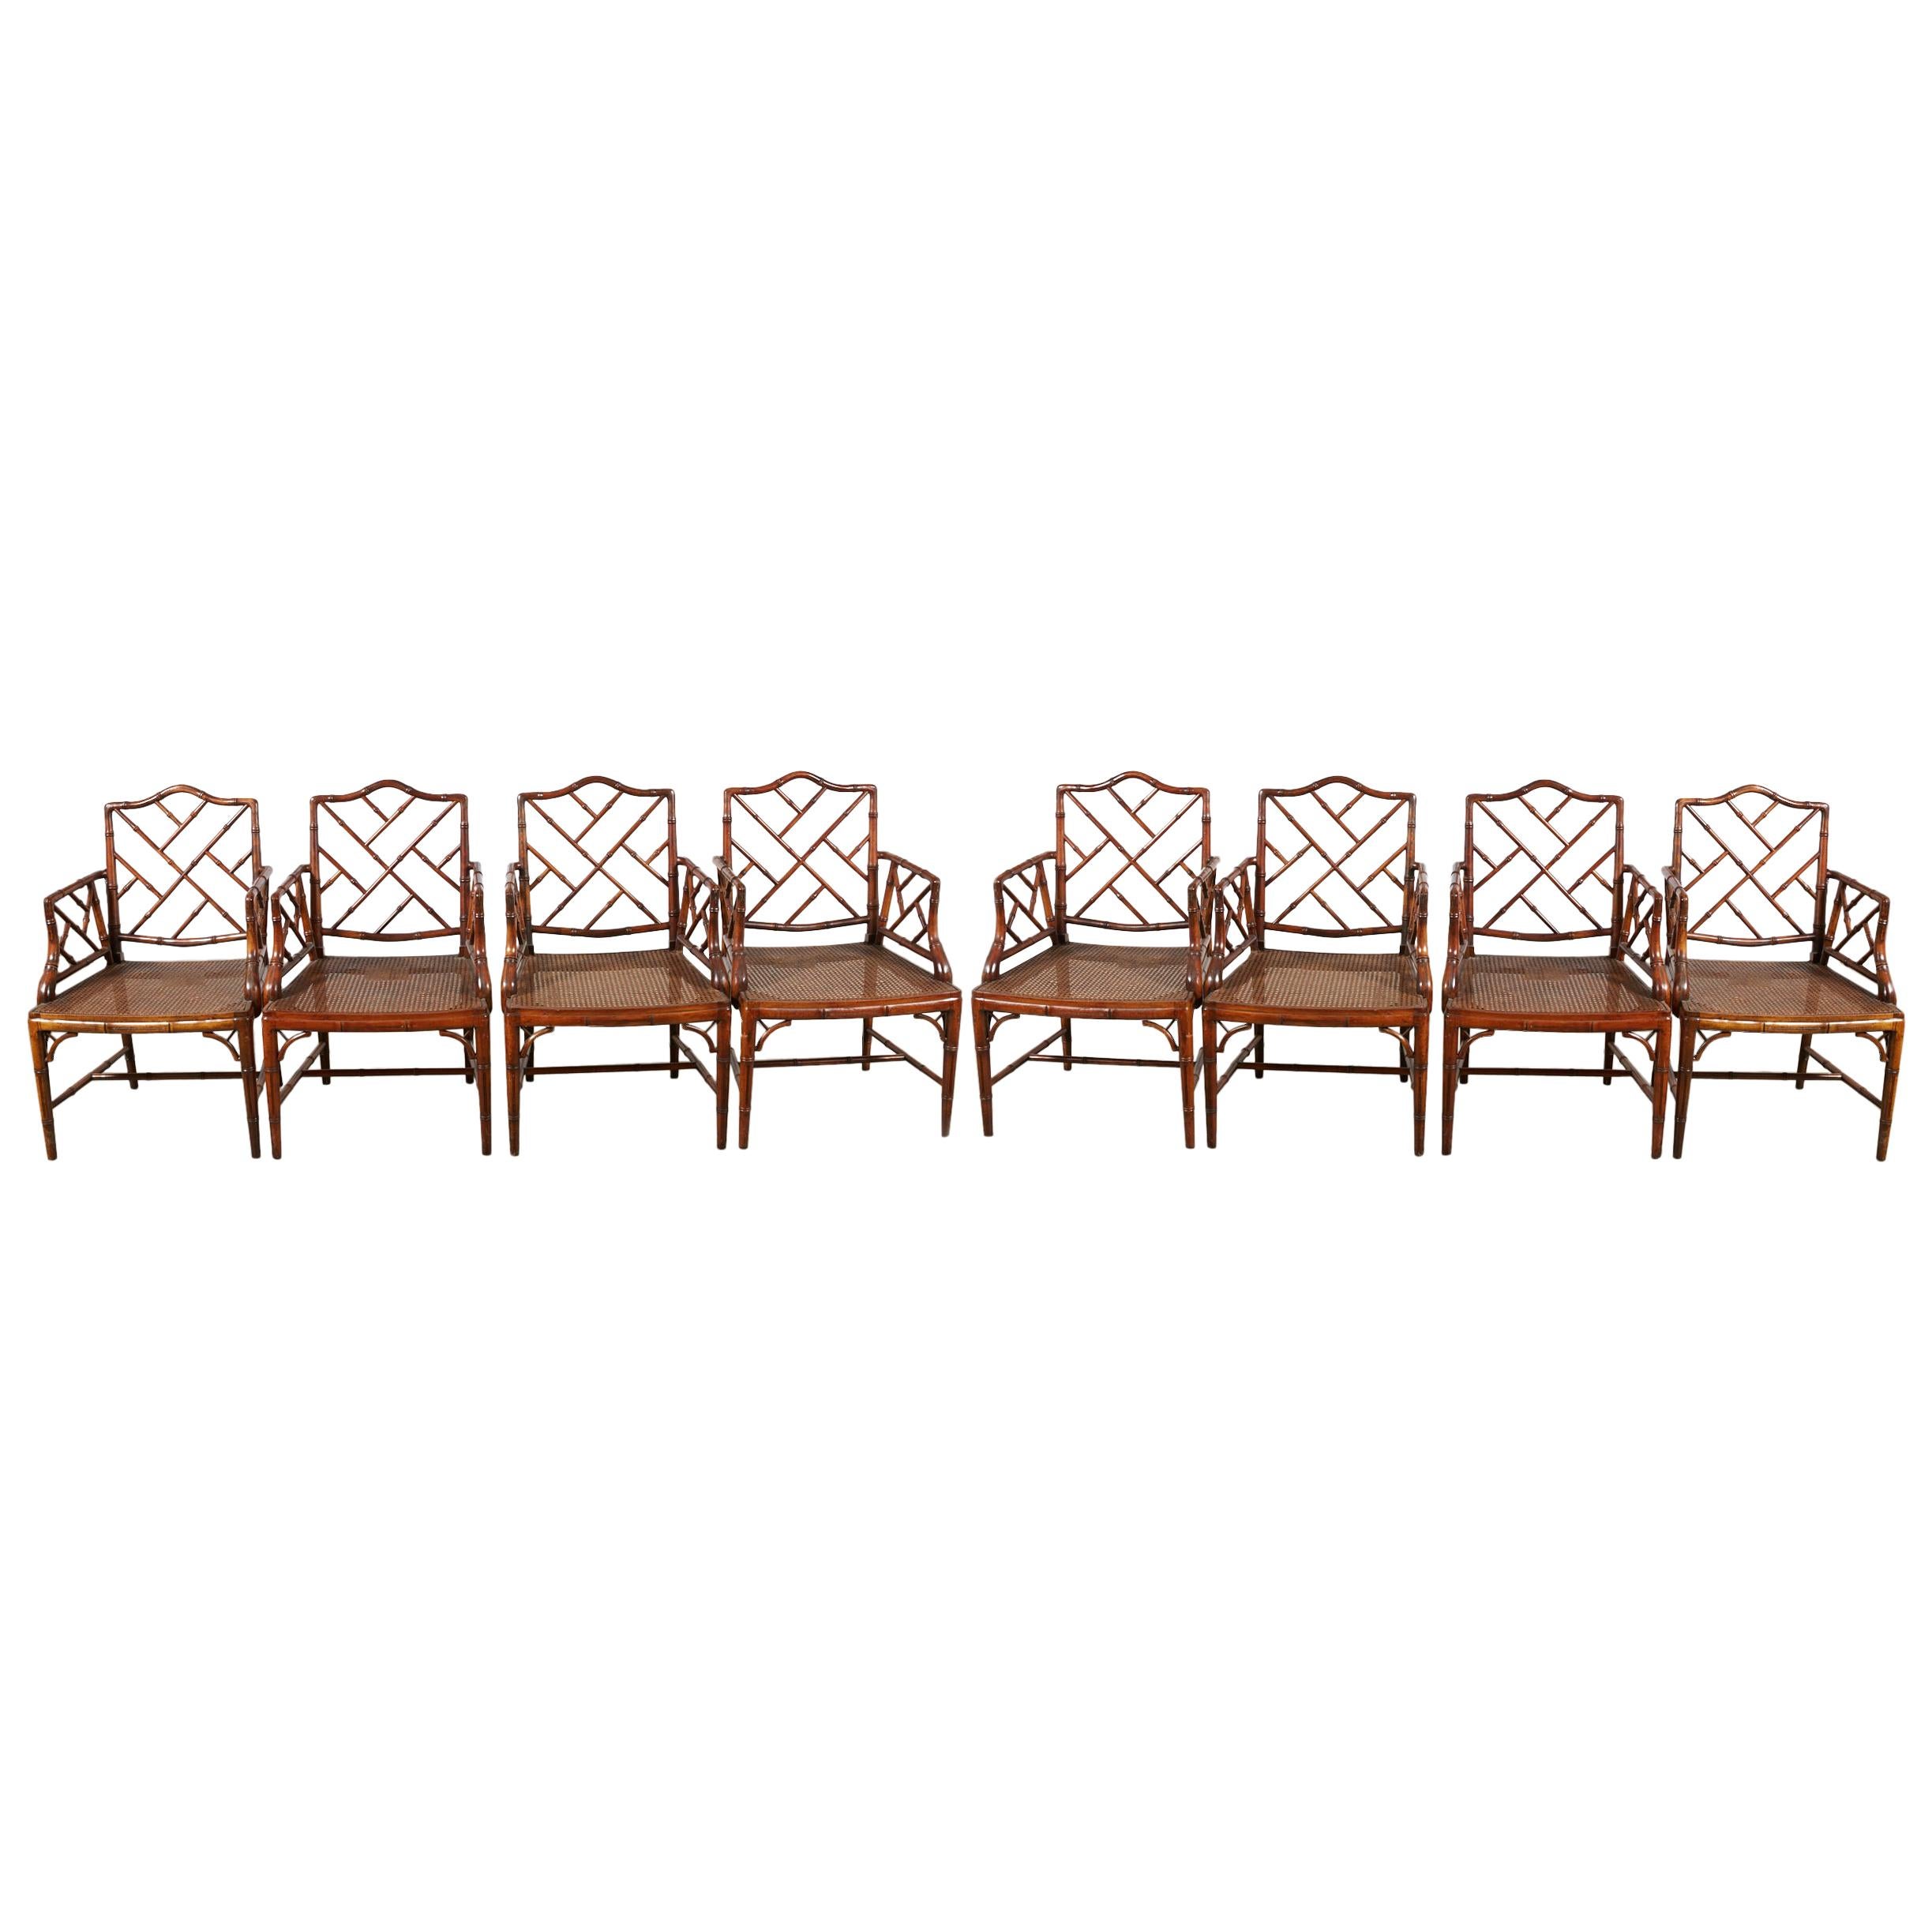 Set of 8 Hekman Chippendale Style Faux Bamboo Armchairs